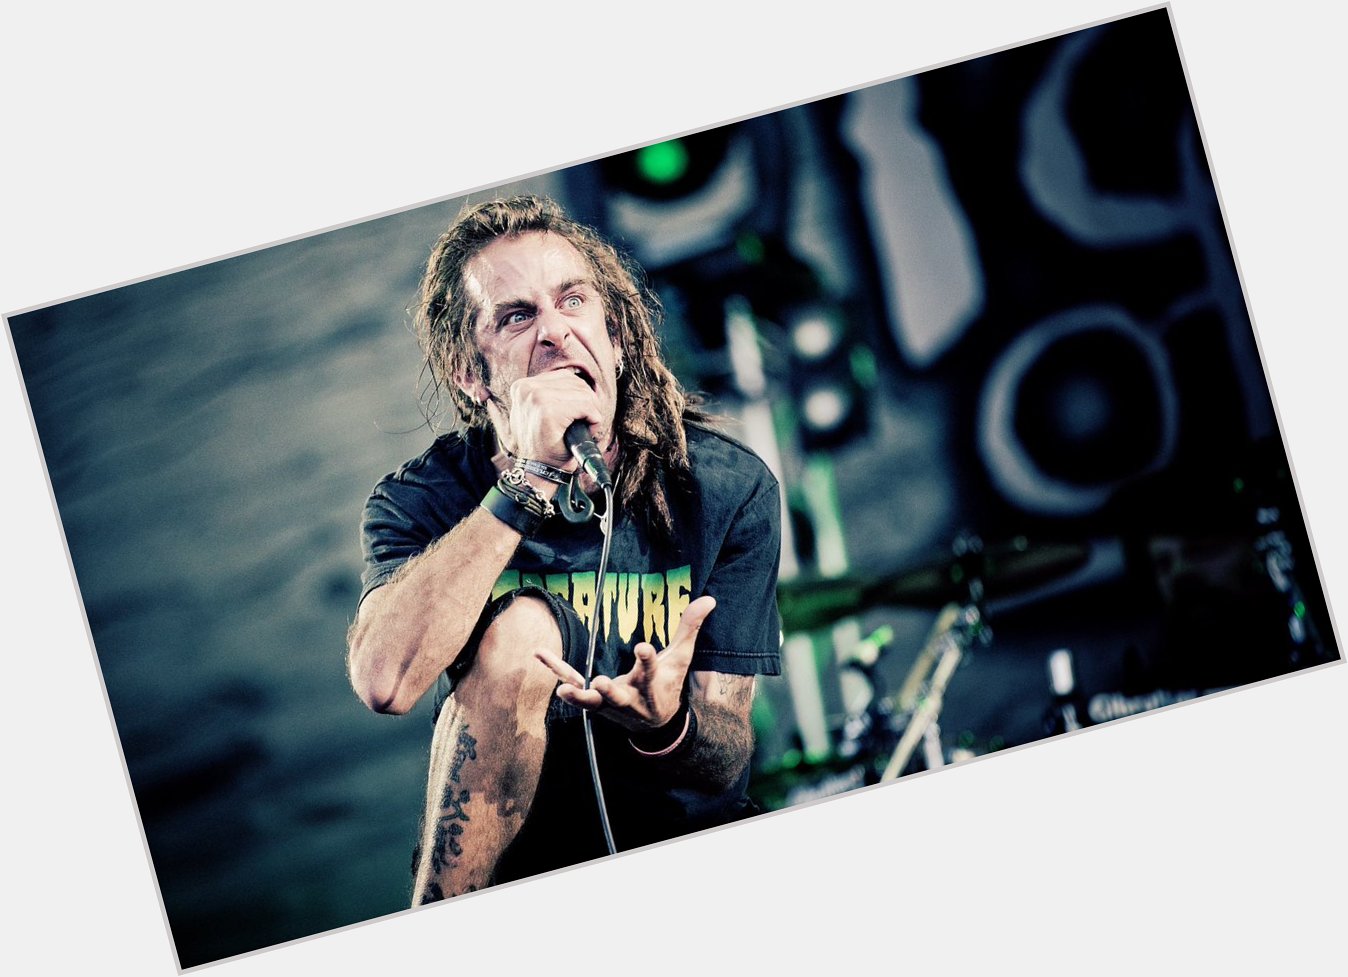 Happy birthday to one of the most brutal vocalists in metal, Randy Blythe 